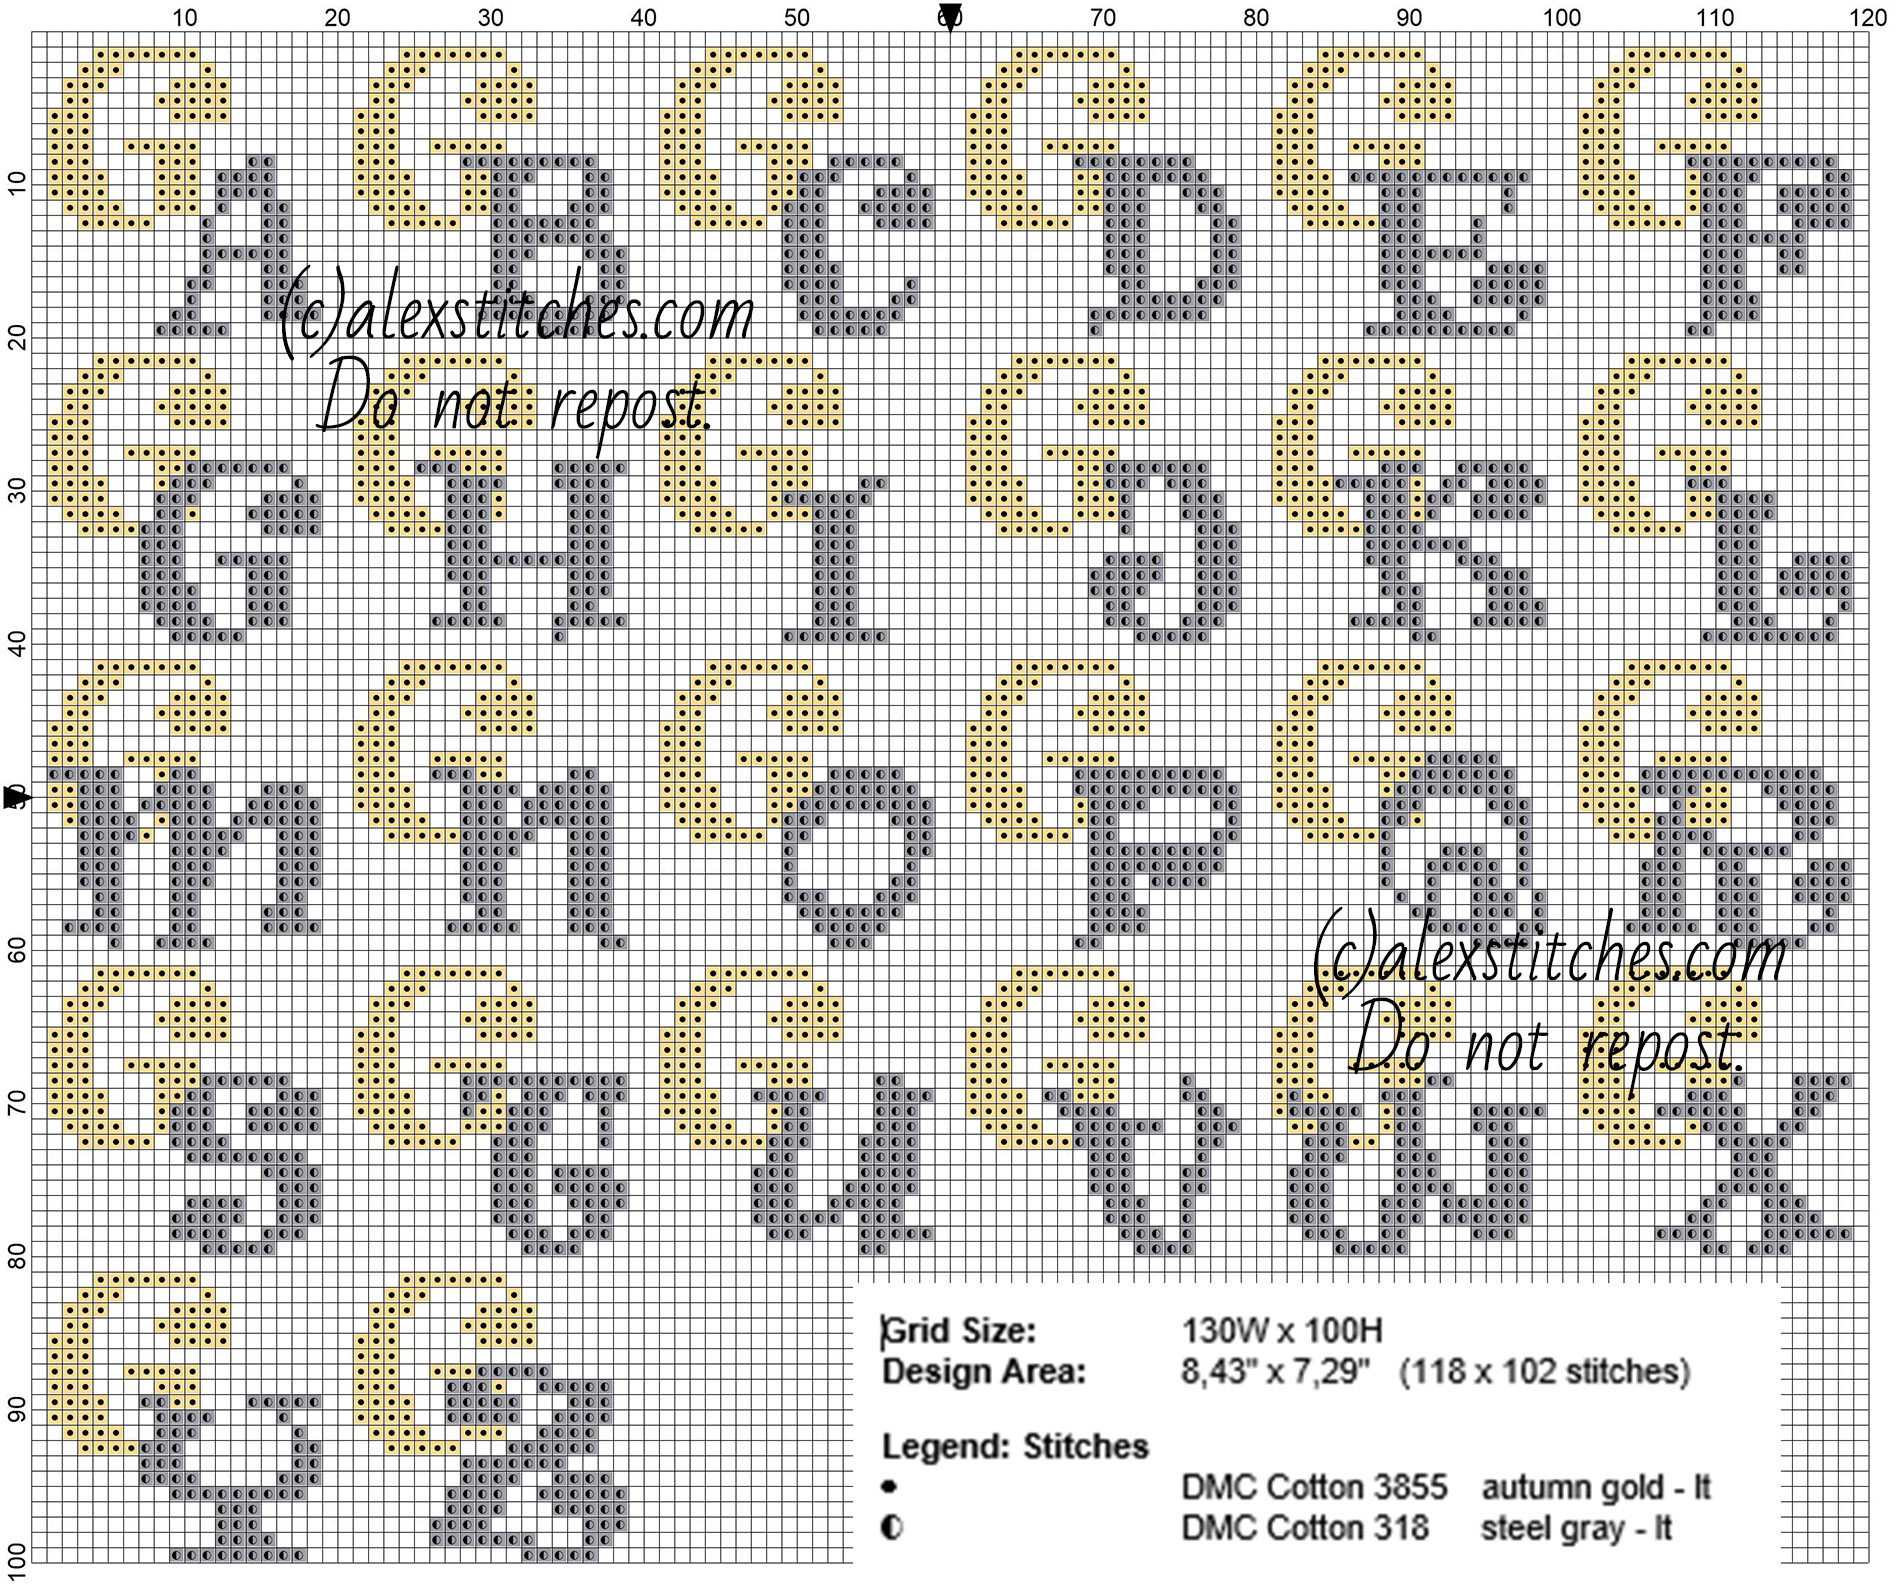 Cross stitch initials gold and silver colors with letter G size about 20 stitches